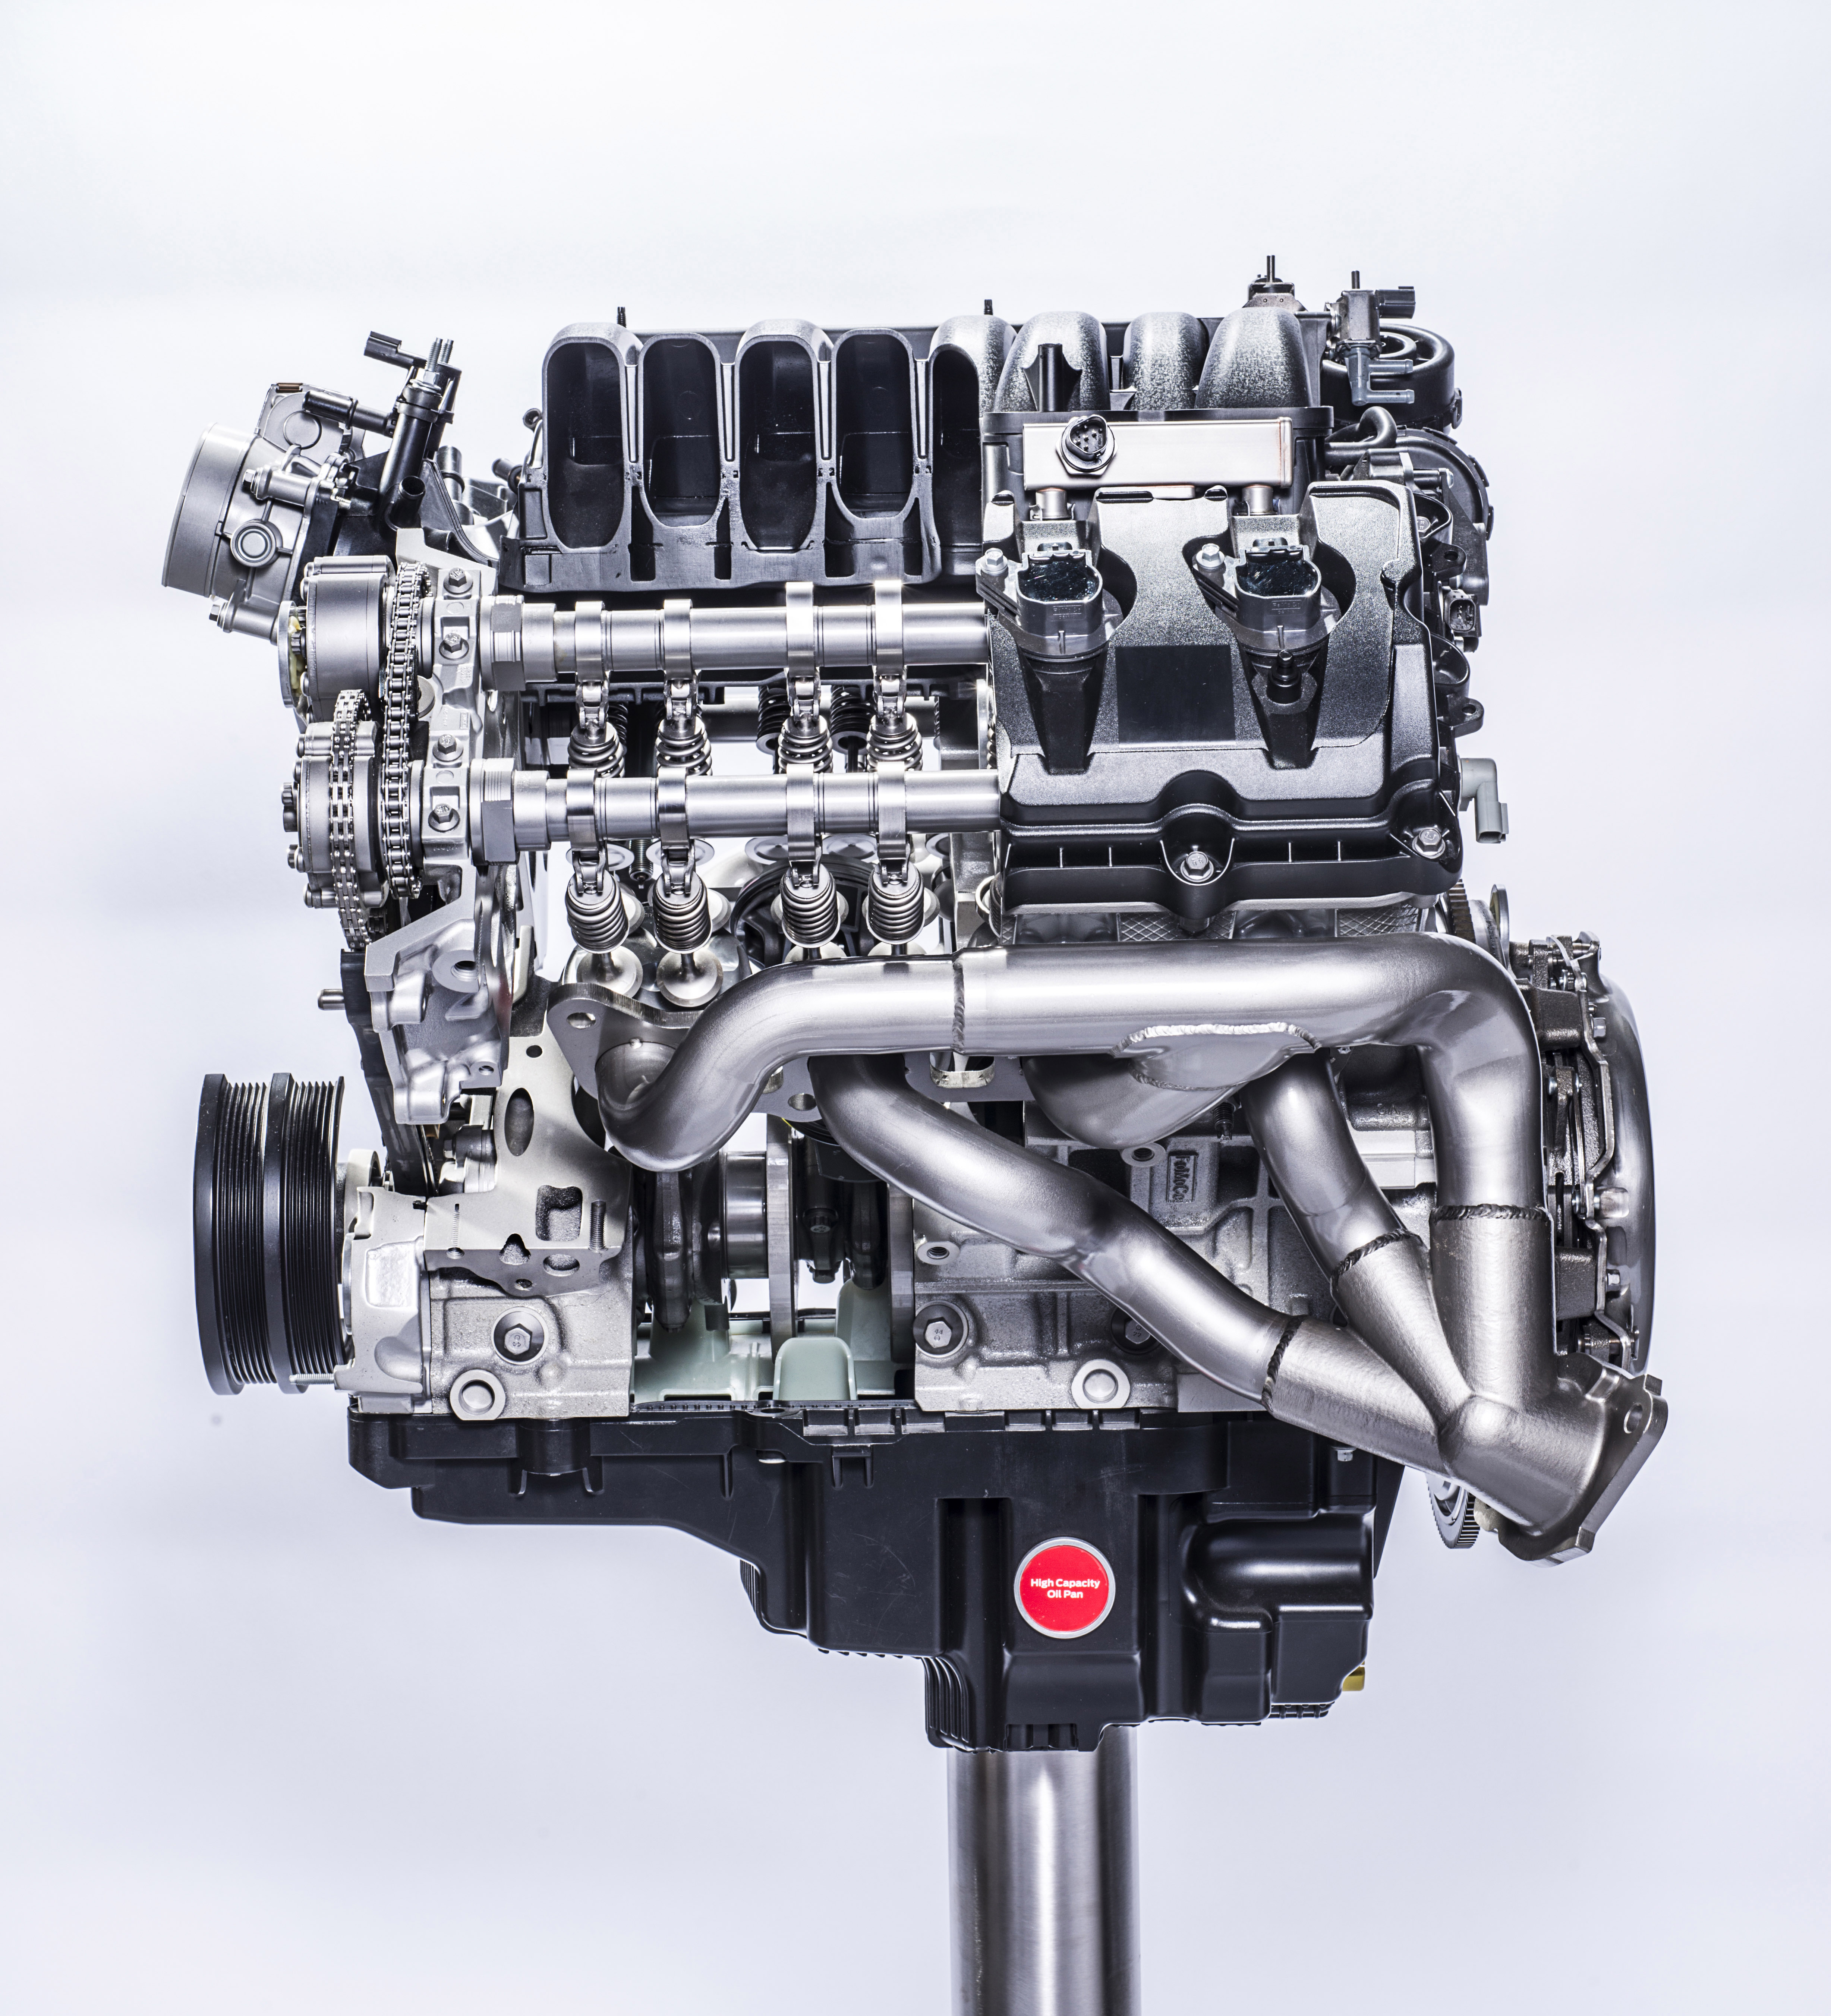 The all-new Ford 5.2-liter flat-plane crankshaft V8 found in the Shelby GT350 and GT350R Mustang will produce 526 horsepower and 429 lb.-ft. of torque. At 102 horsepower per liter, the engine is both the most power-dense and the most powerful naturally aspirated road-going engine in Ford history